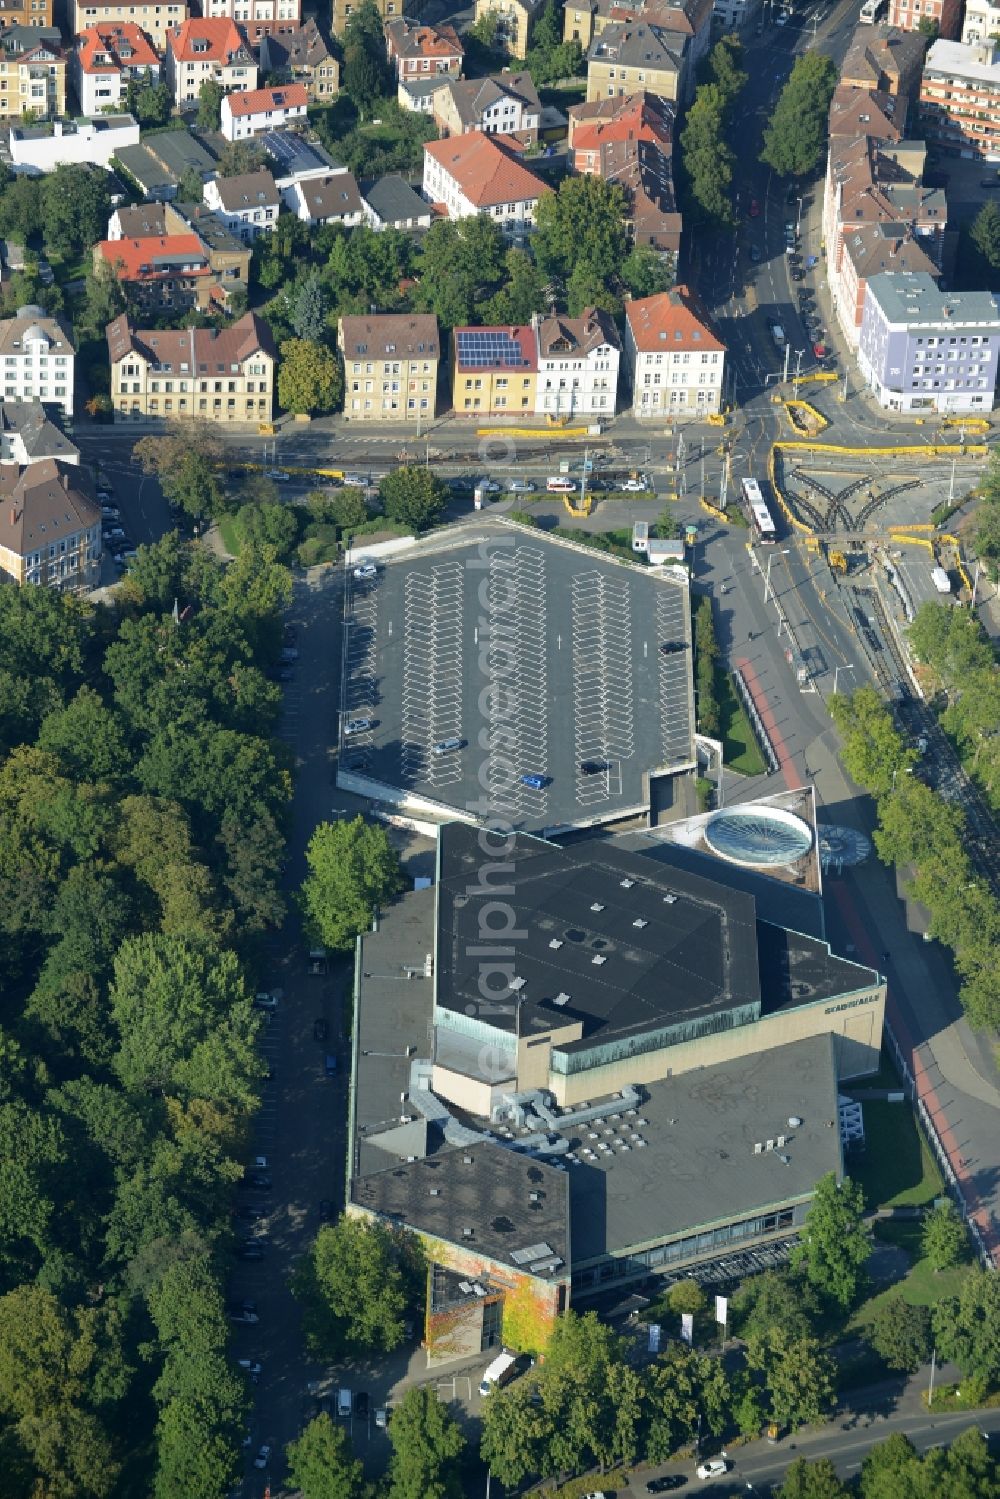 Aerial image Braunschweig - Town Hall in the Southeast of downtown Braunschweig in the state of Lower Saxony. The architectural distinct events location with parking lot is located amidst trees and residential buildings